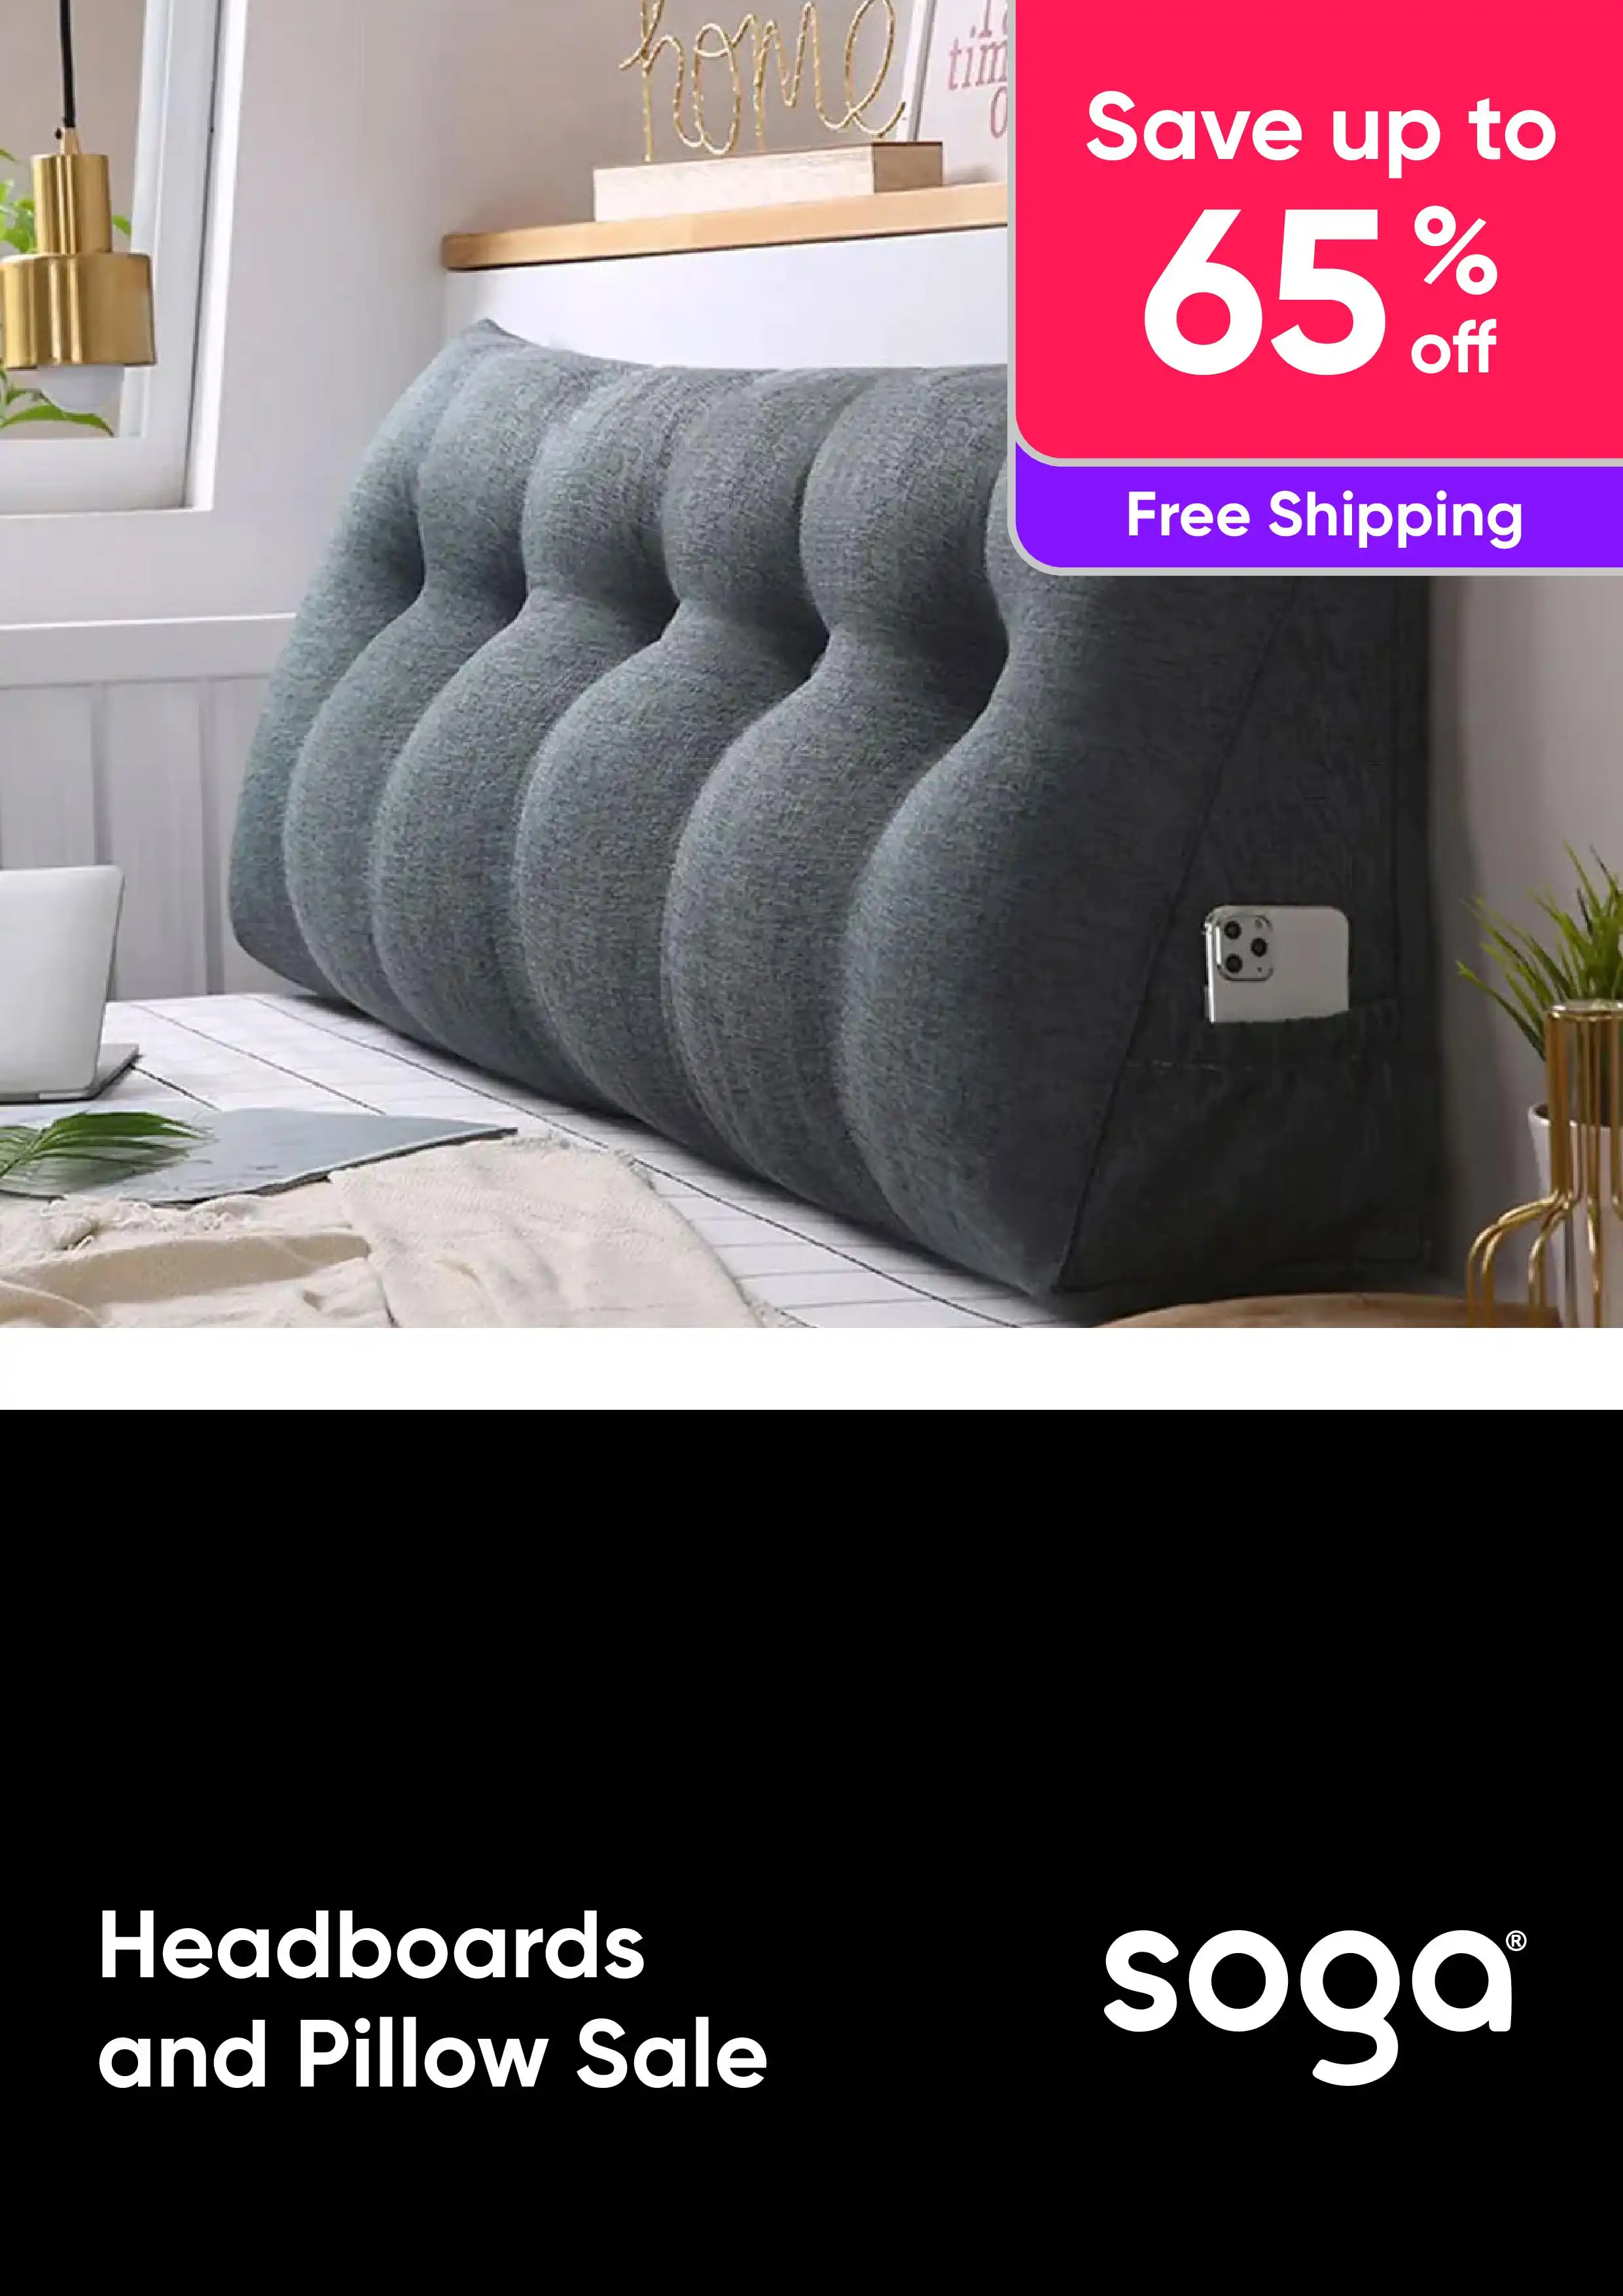 Headboards and Pillows Sale - Up To 65% Off